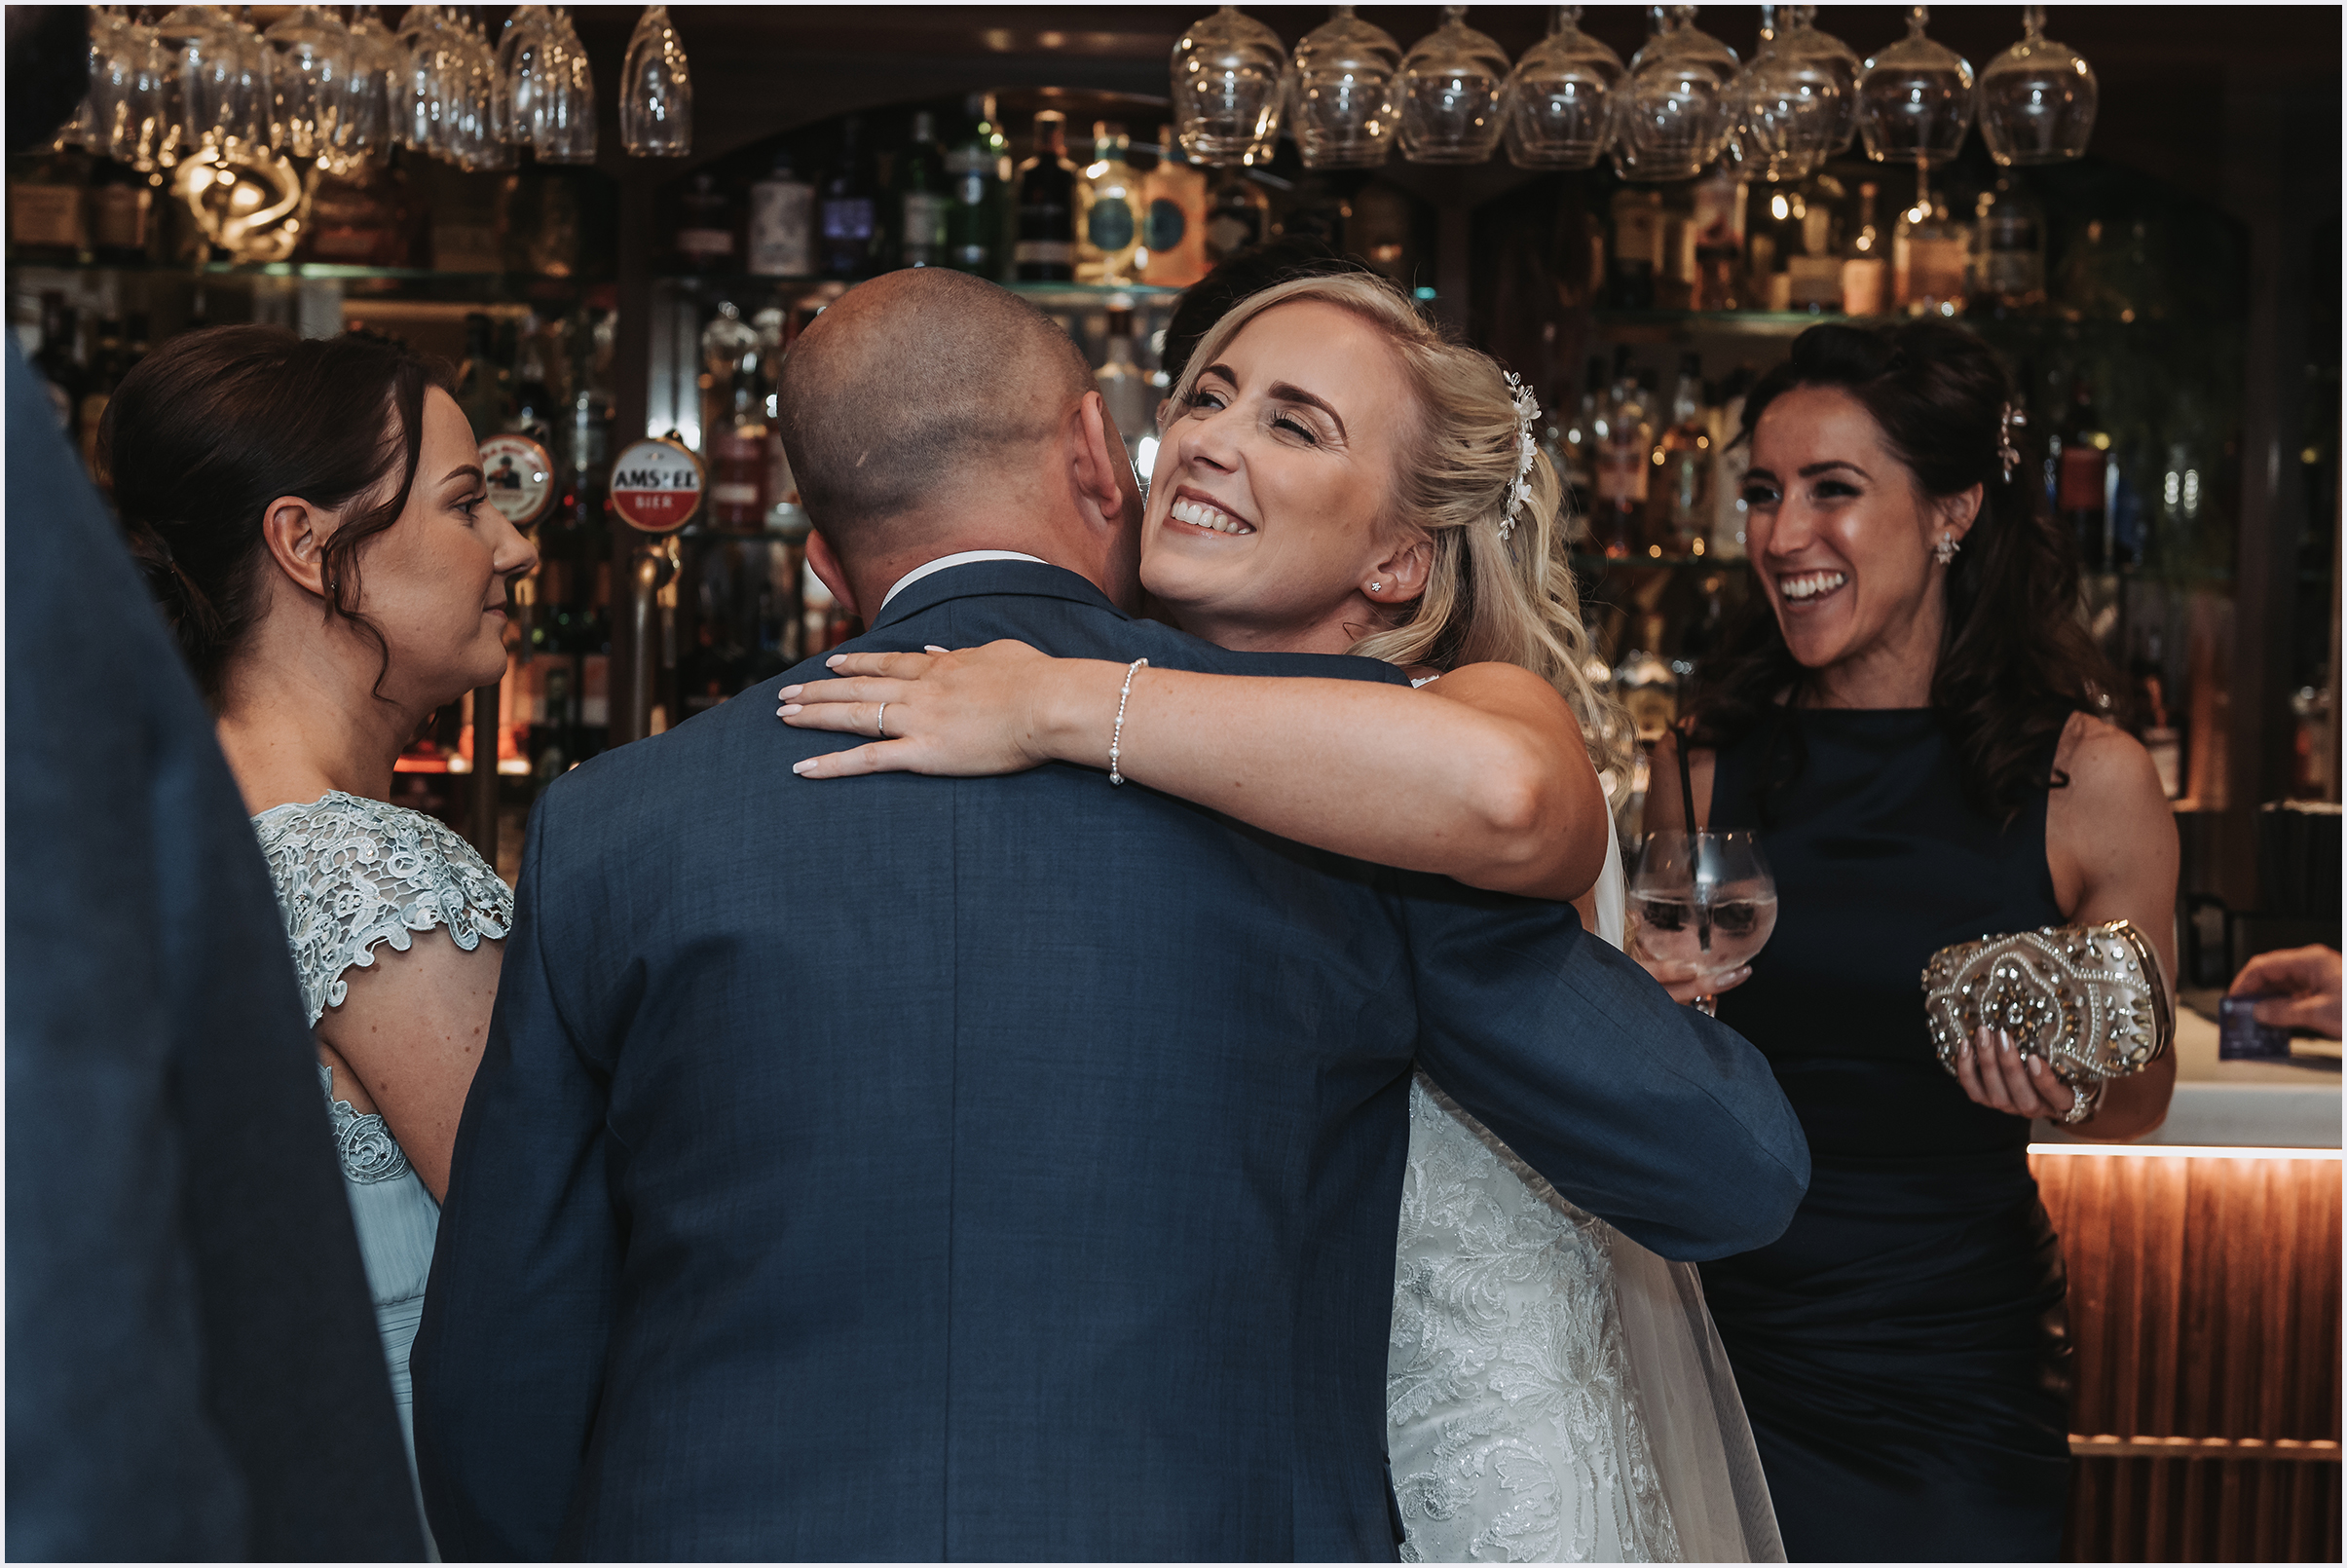 A bride hugging one of her wedding guests during the drinks reception at her wedding at The Grosvenor Pulford Hotel and Spa.